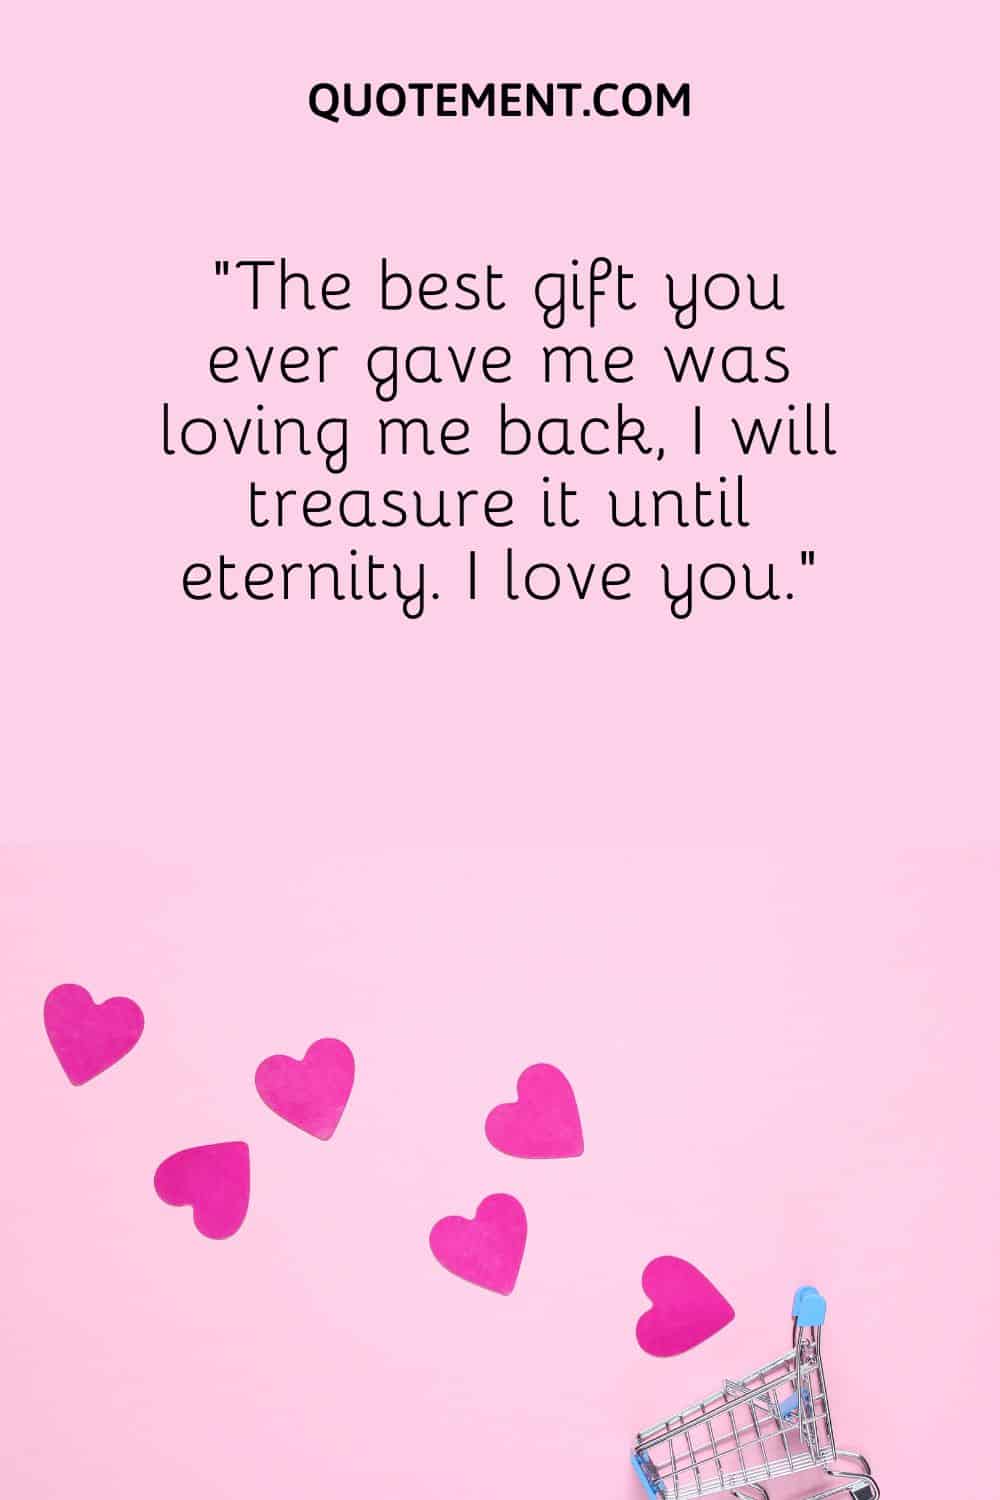 “The best gift you ever gave me was loving me back, I will treasure it until eternity. I love you.”